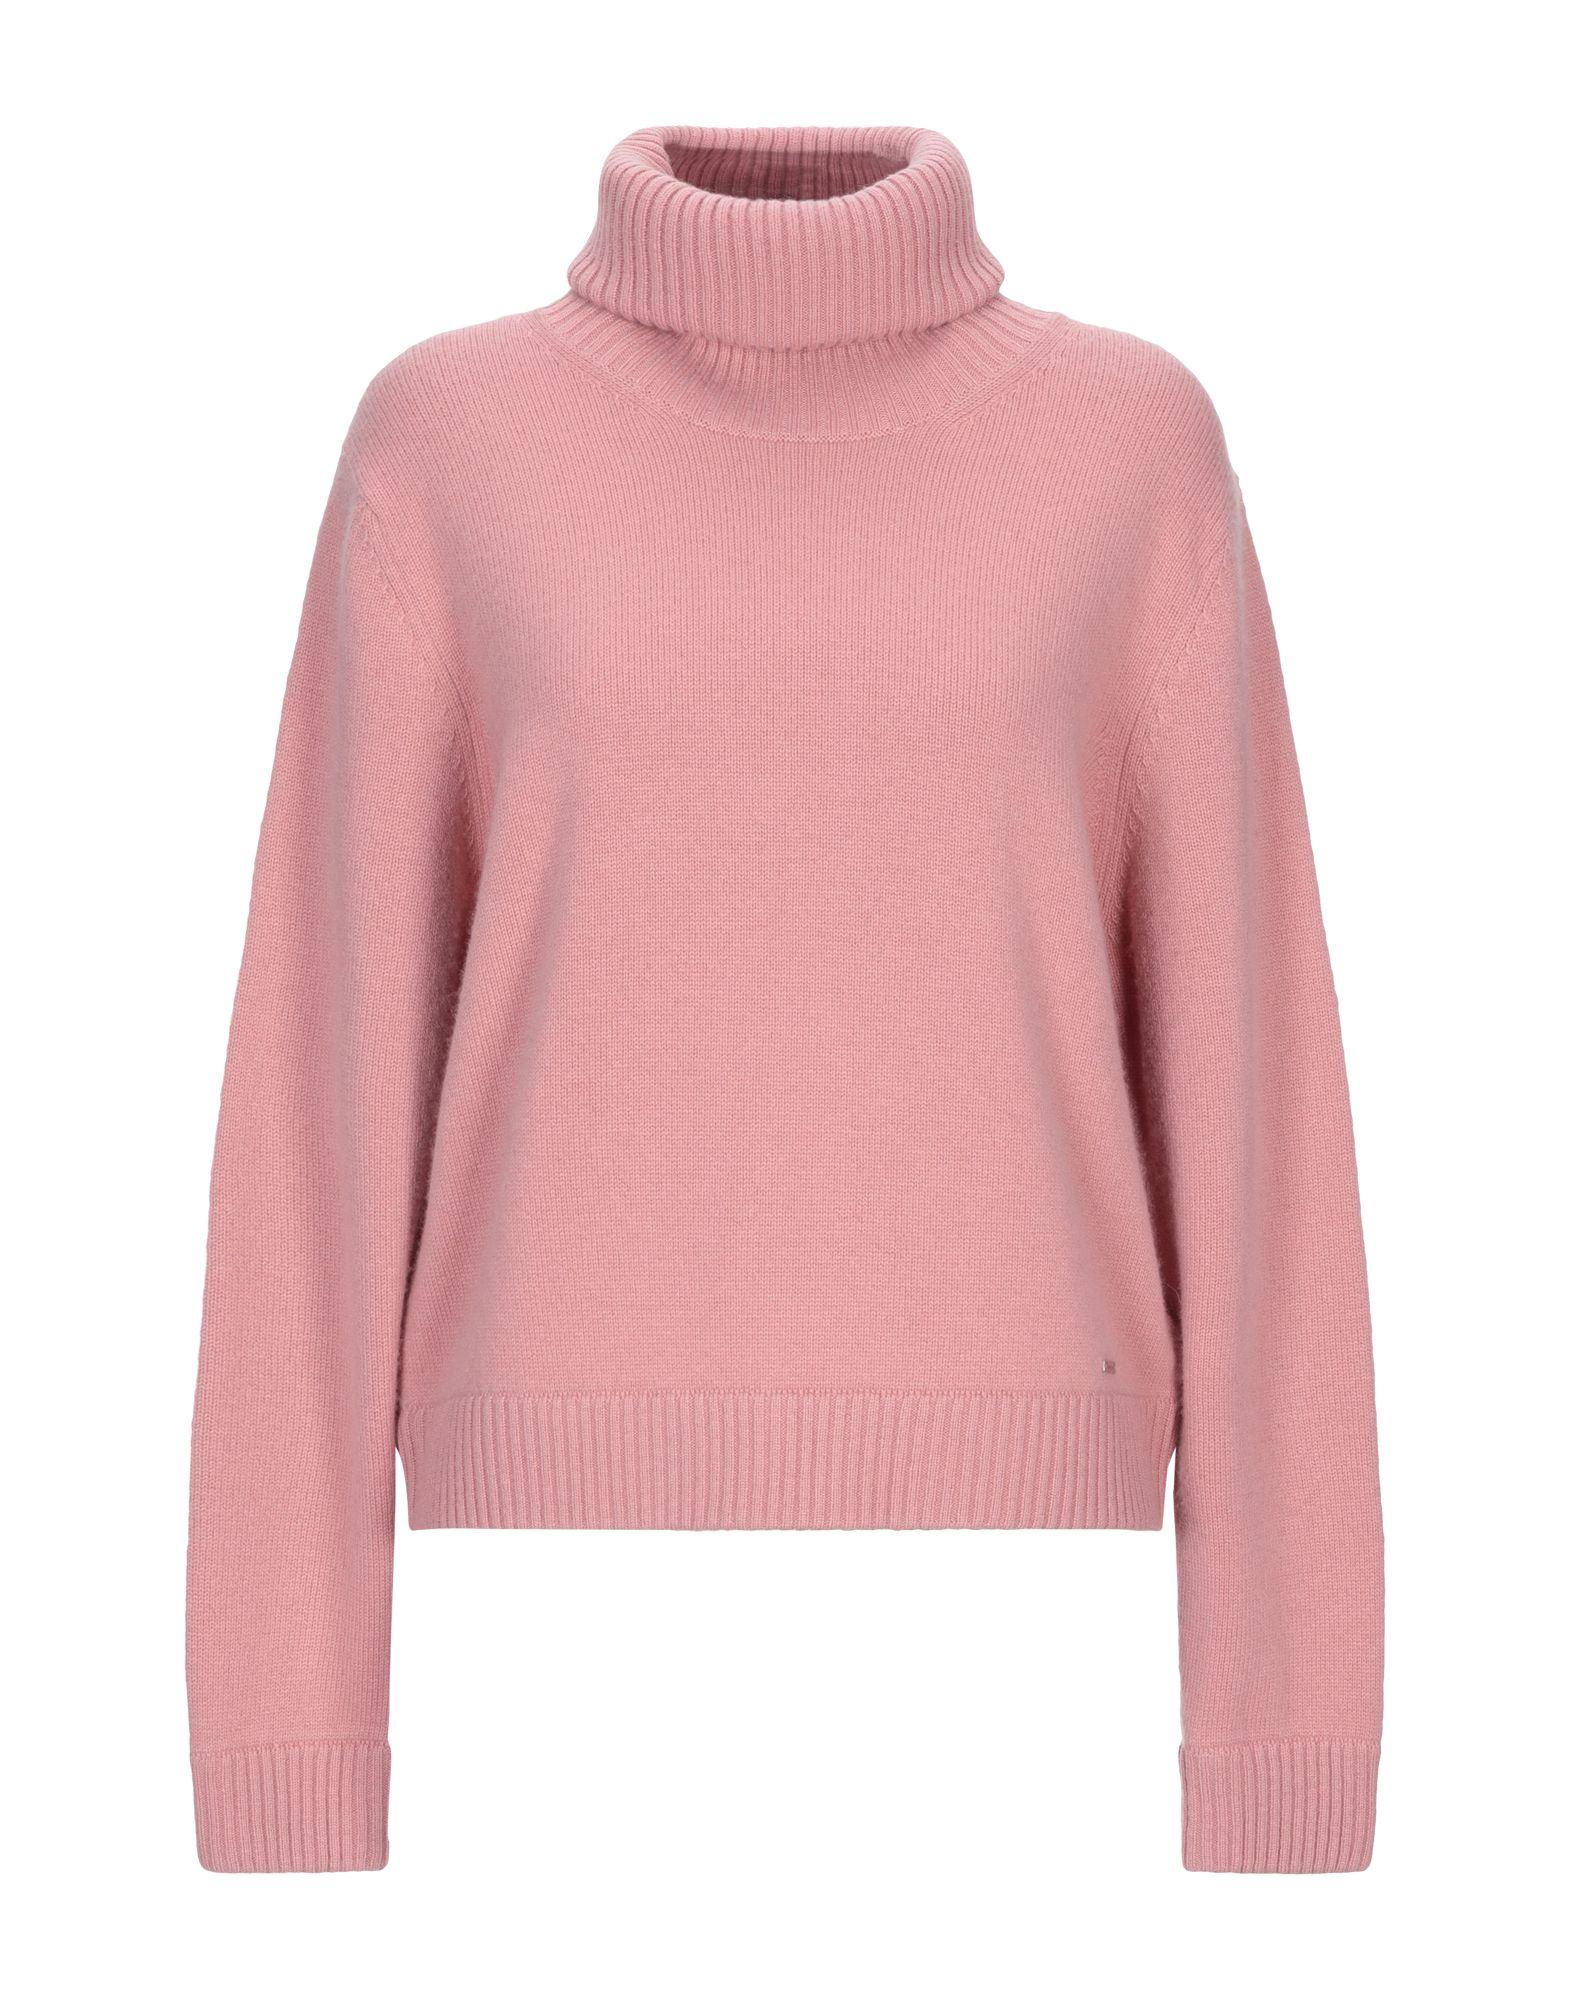 DSquared² Wool Turtleneck in Pastel Pink (Pink) - Lyst